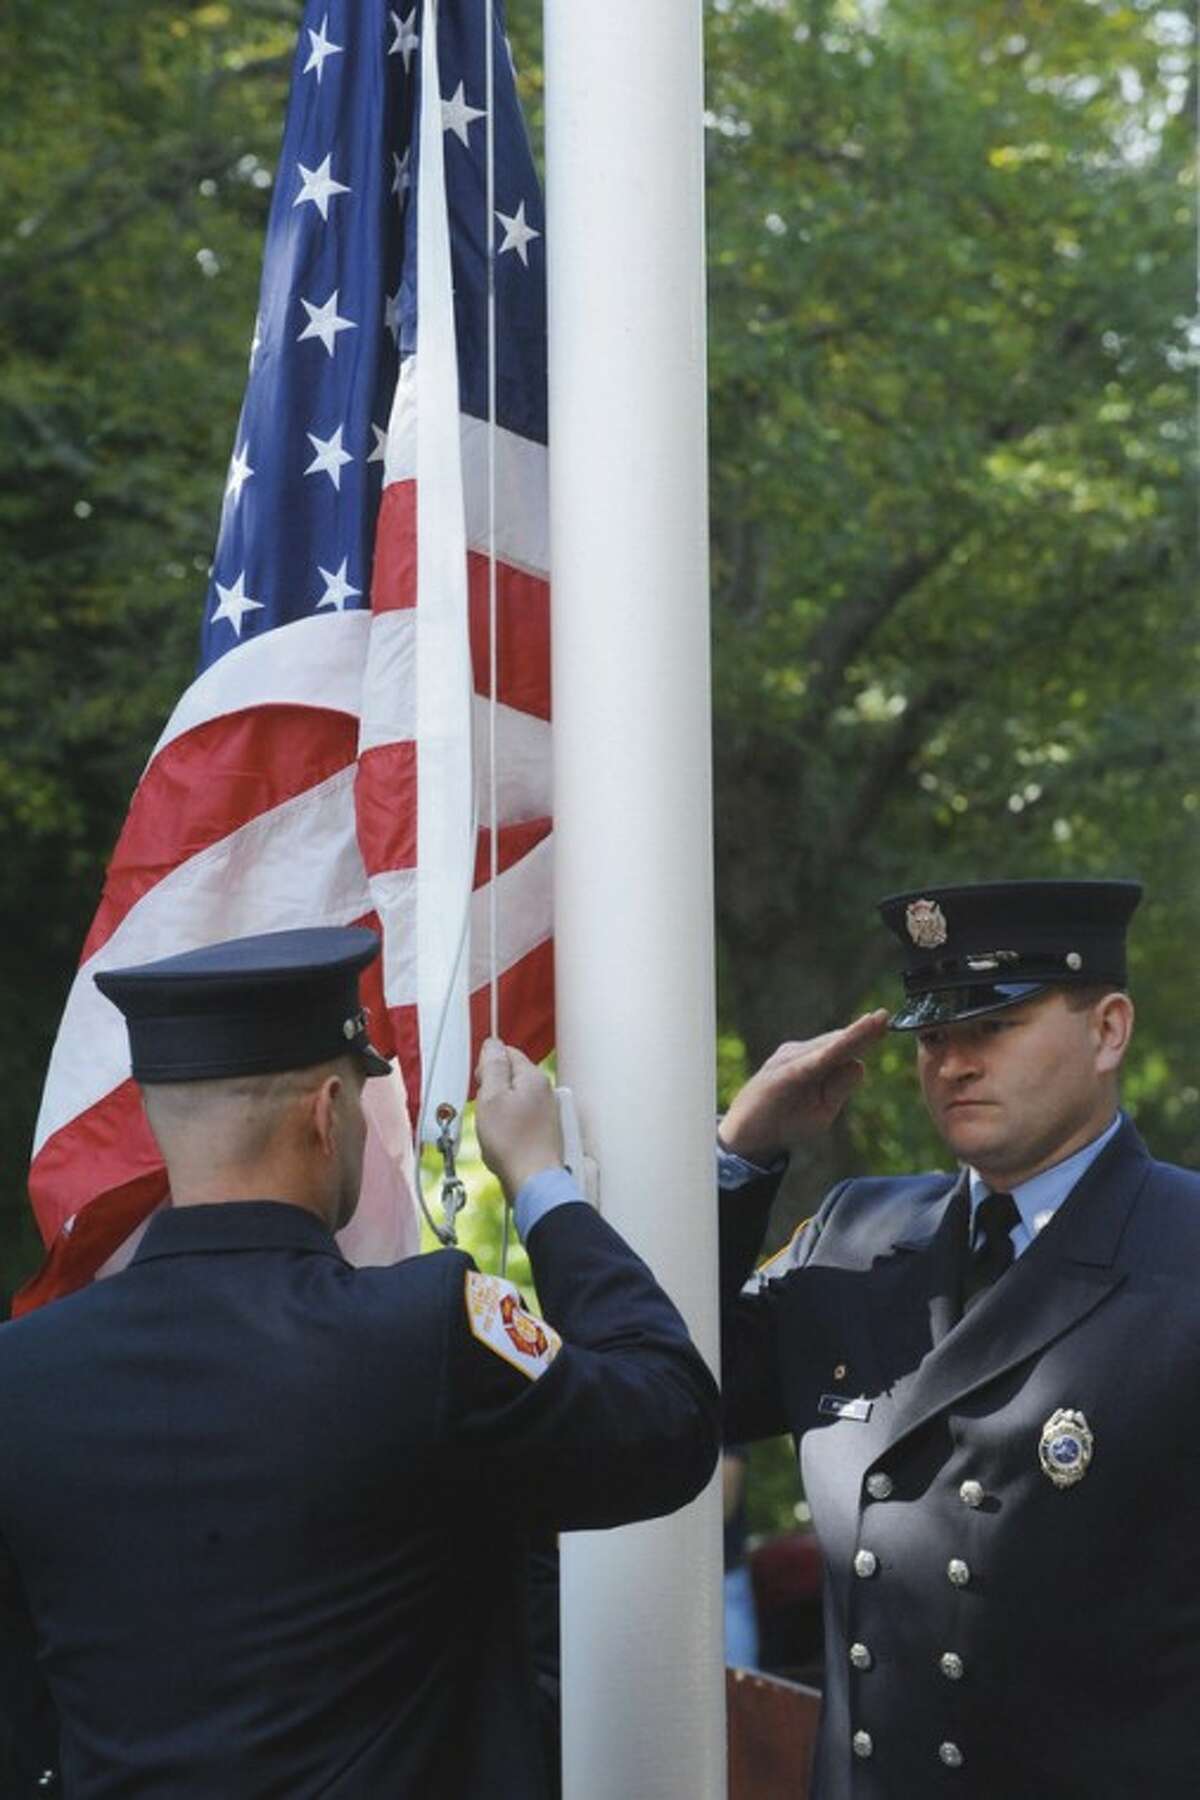 Wilton Fire Department holds a remembrance ceremony Sunday for Wilton residents killed the September 11th attacks. hour photo/matthew vinci